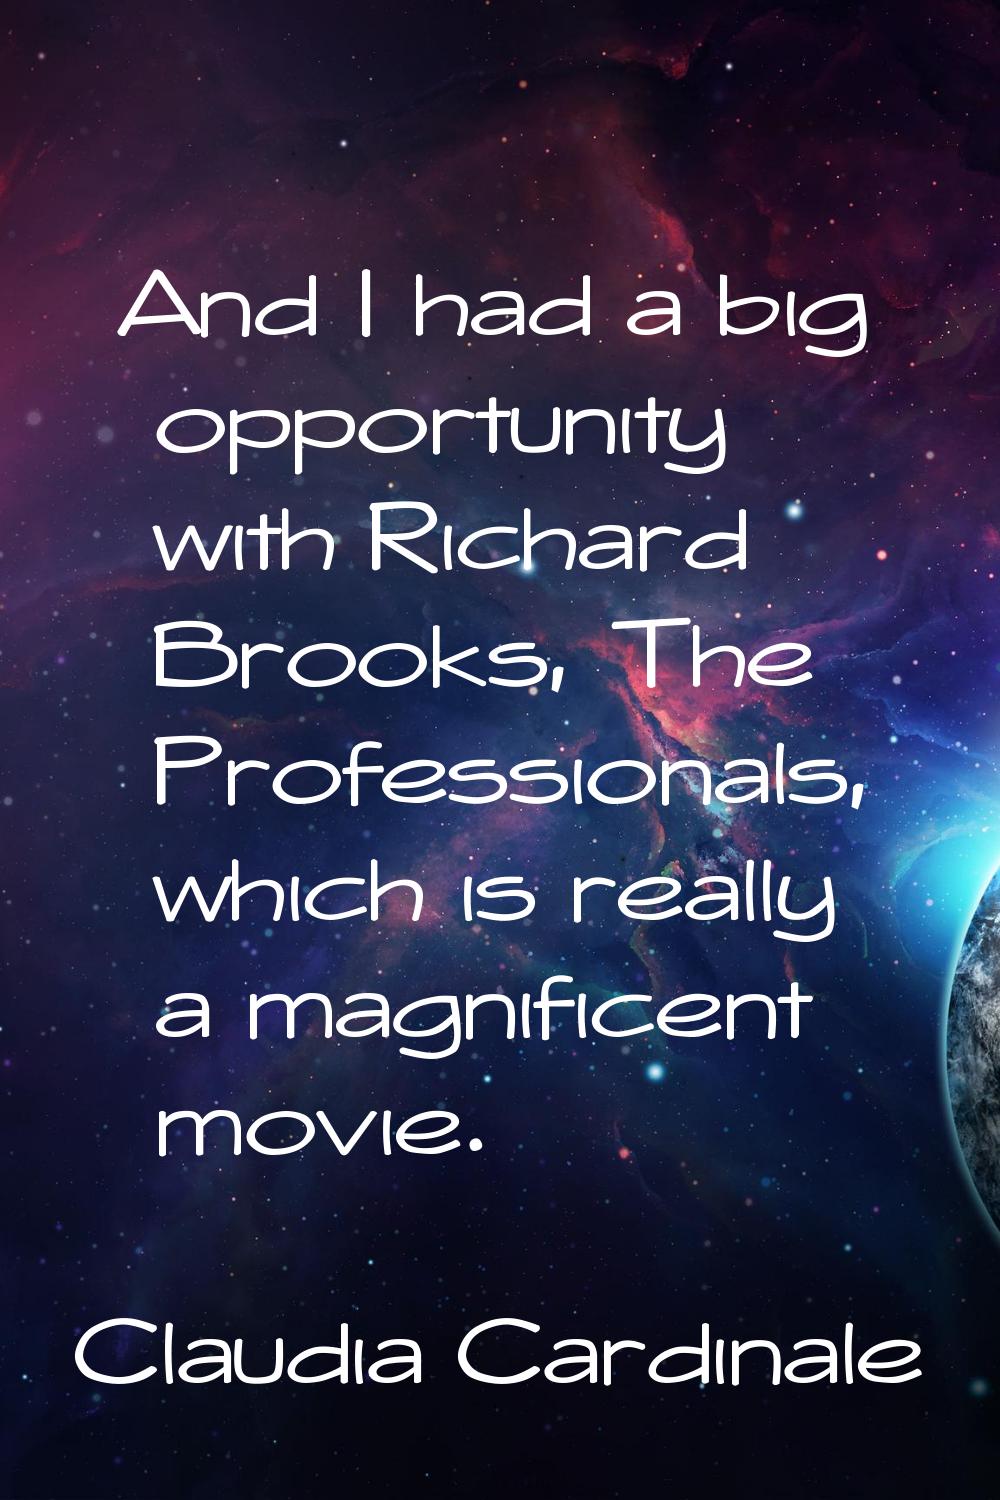 And I had a big opportunity with Richard Brooks, The Professionals, which is really a magnificent m